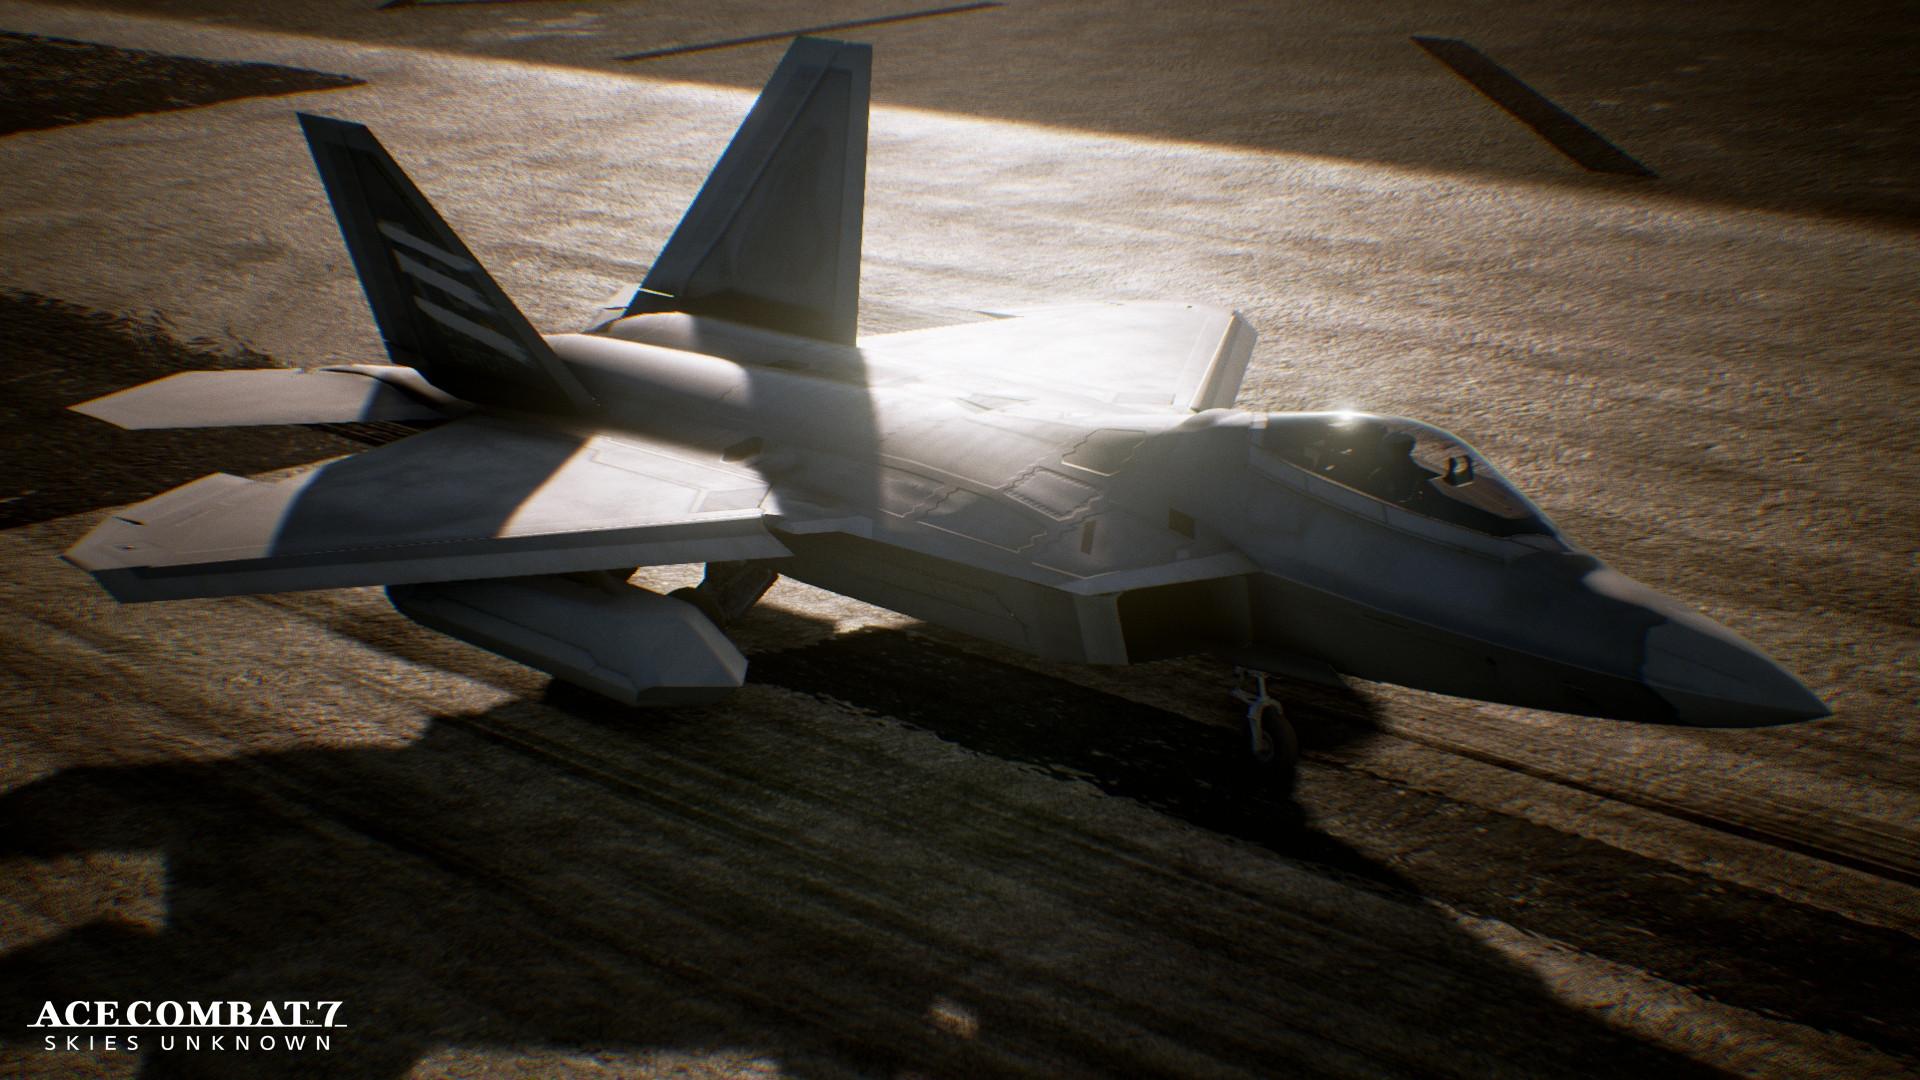 Ace Combat 7: Skies Unknown [Video Game]